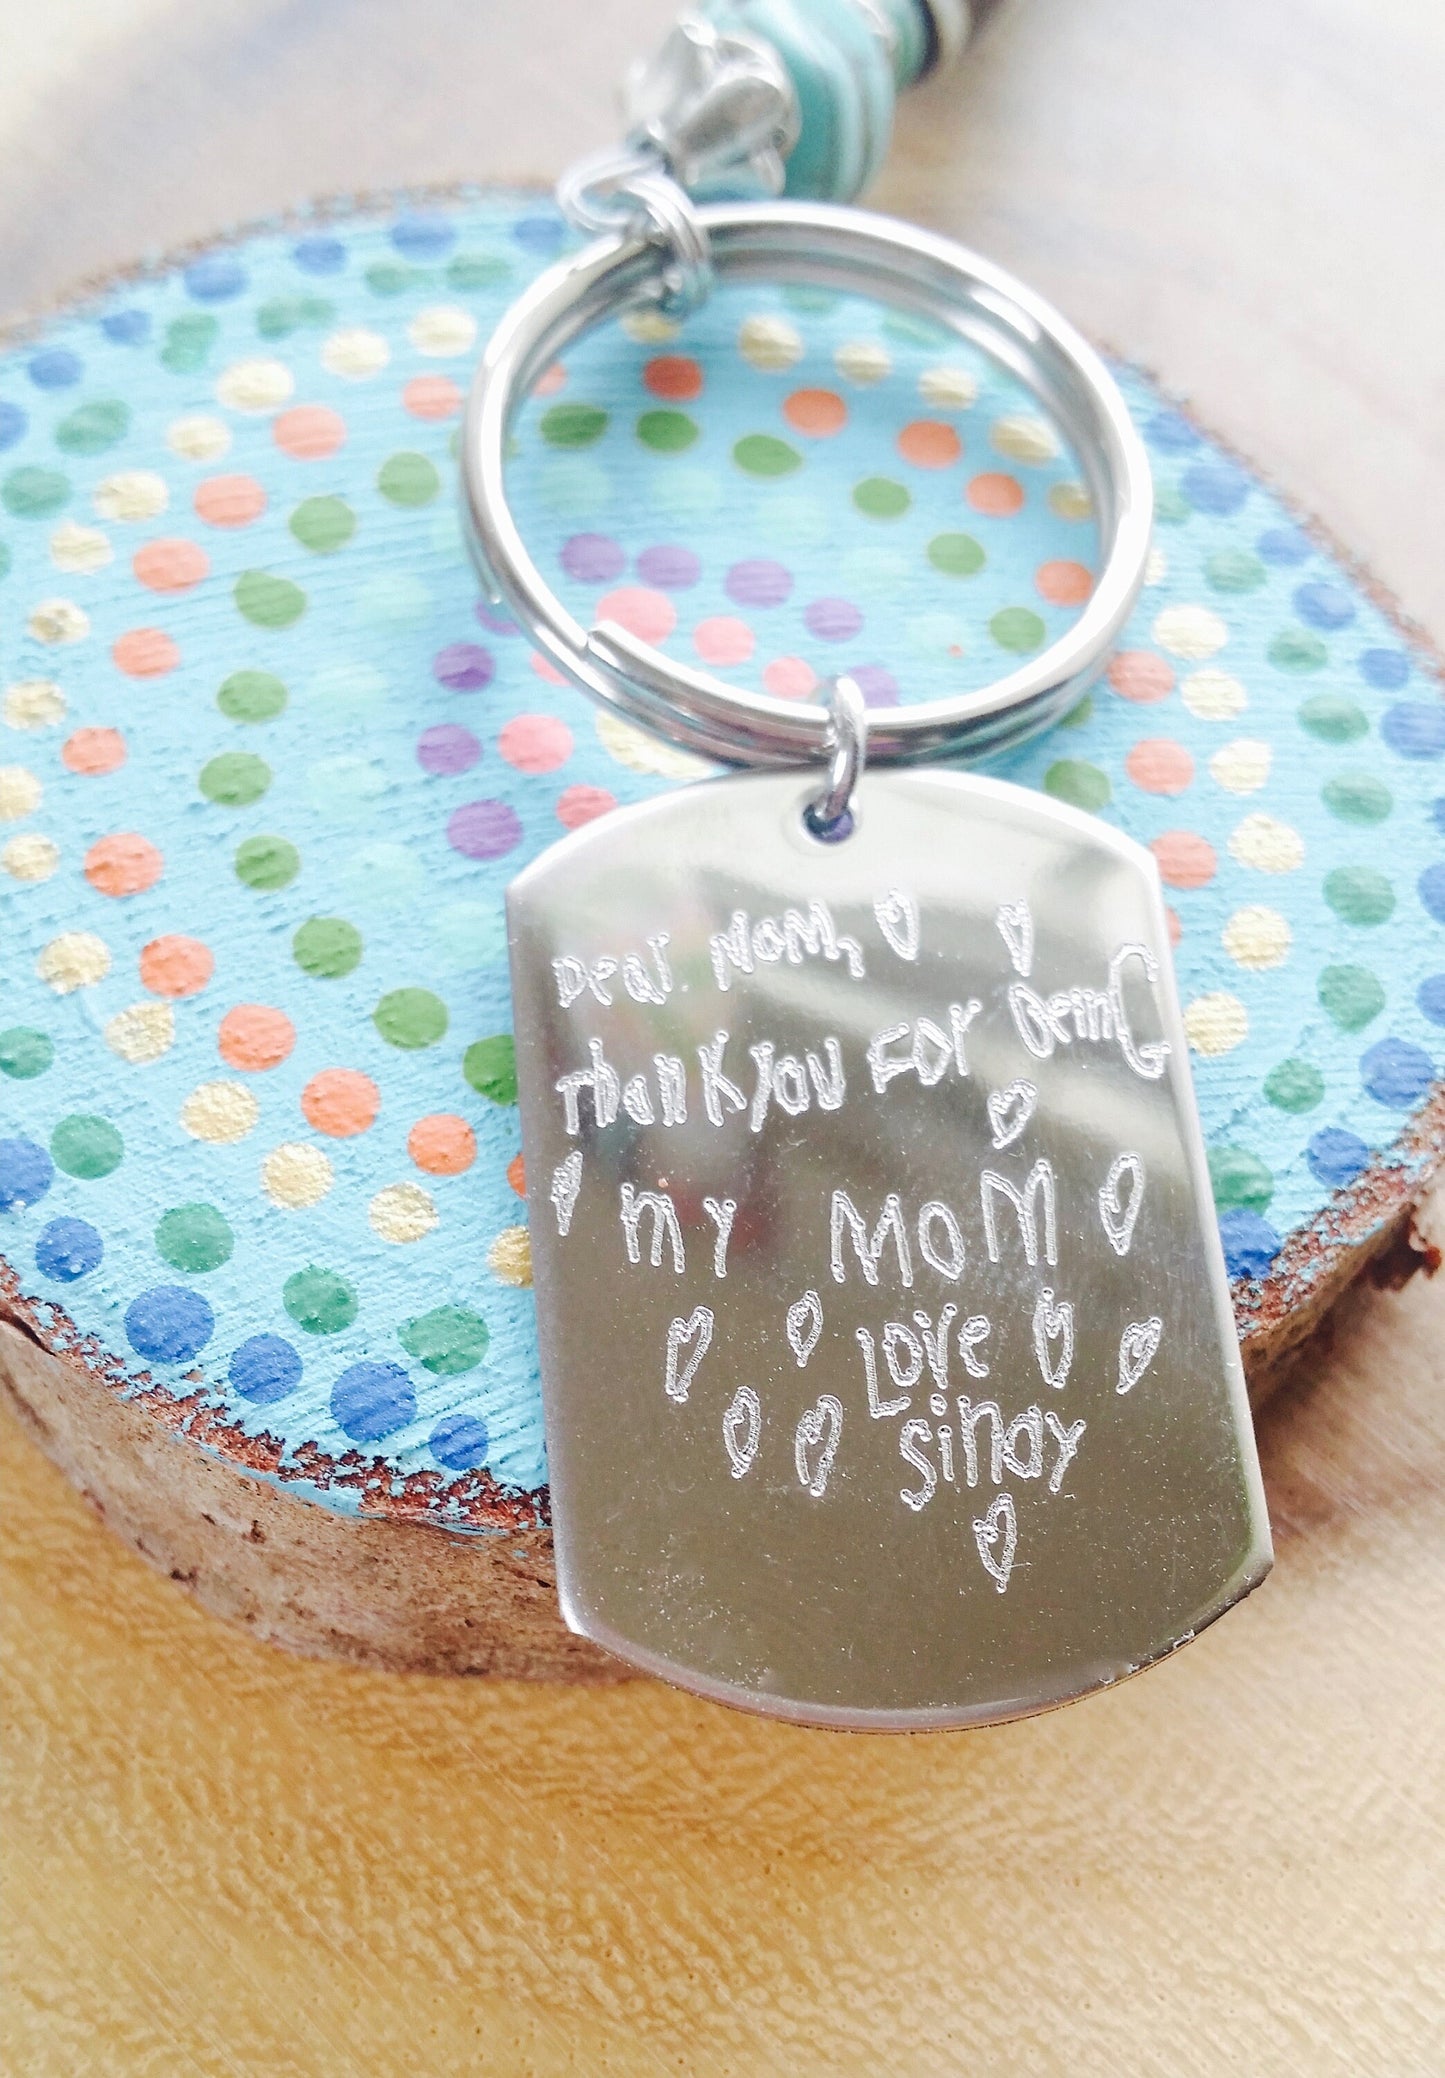 Mothers day gift, Child drawing, Handwriting key chain, custom signature Engraved key chain, gift for mom or grandma, actual handwritten.